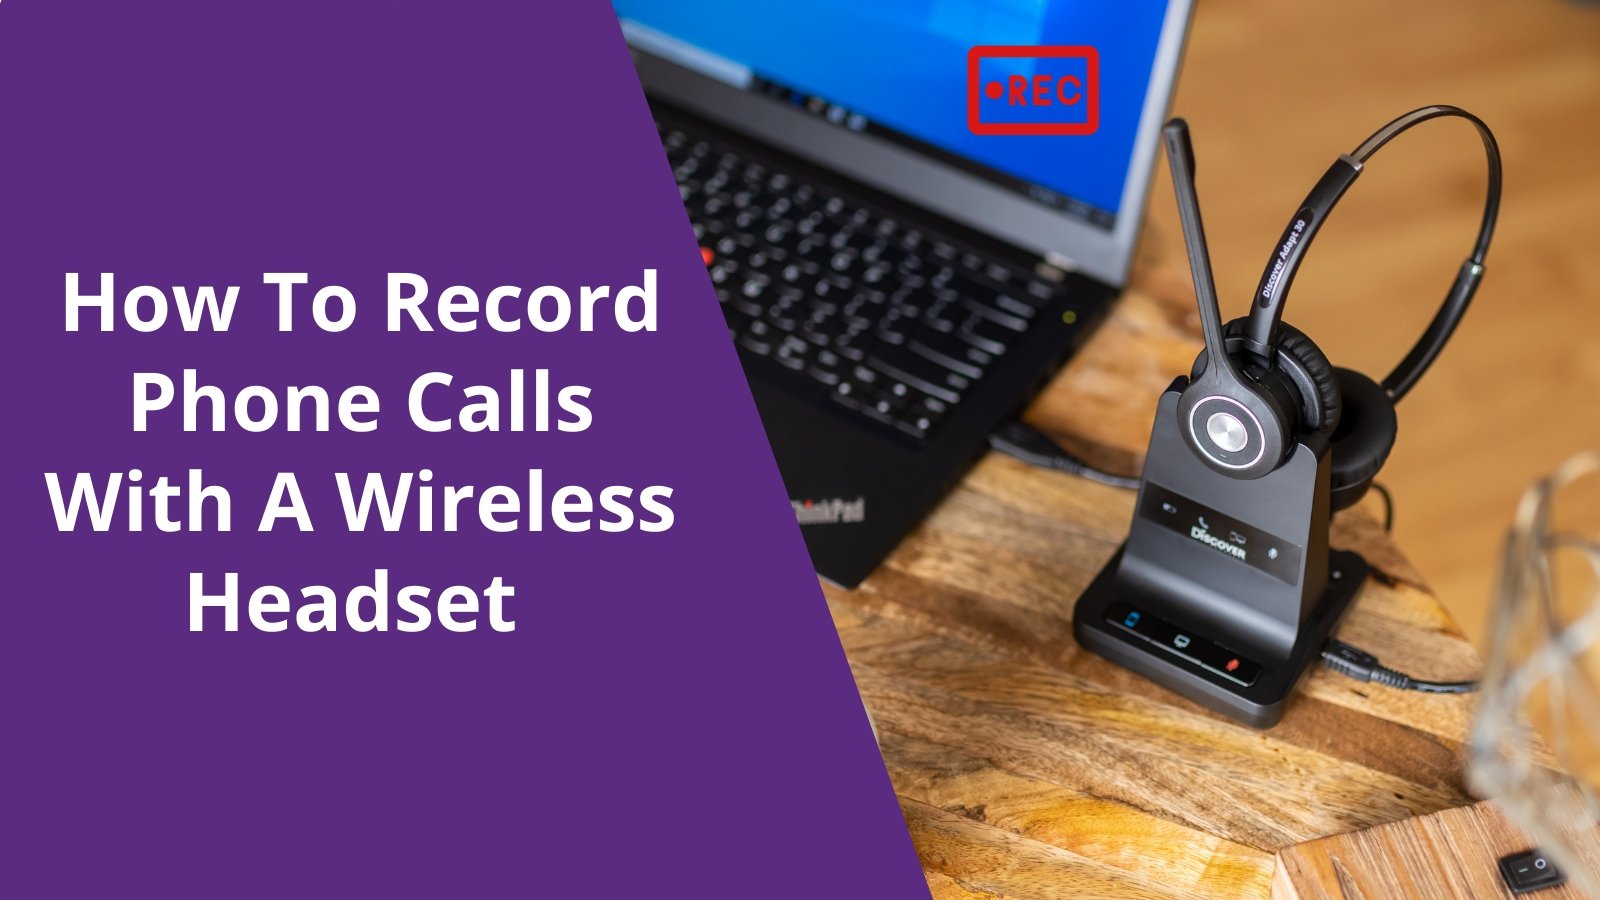 How To Record Phone Calls With A Wireless Headset - Headset Advisor